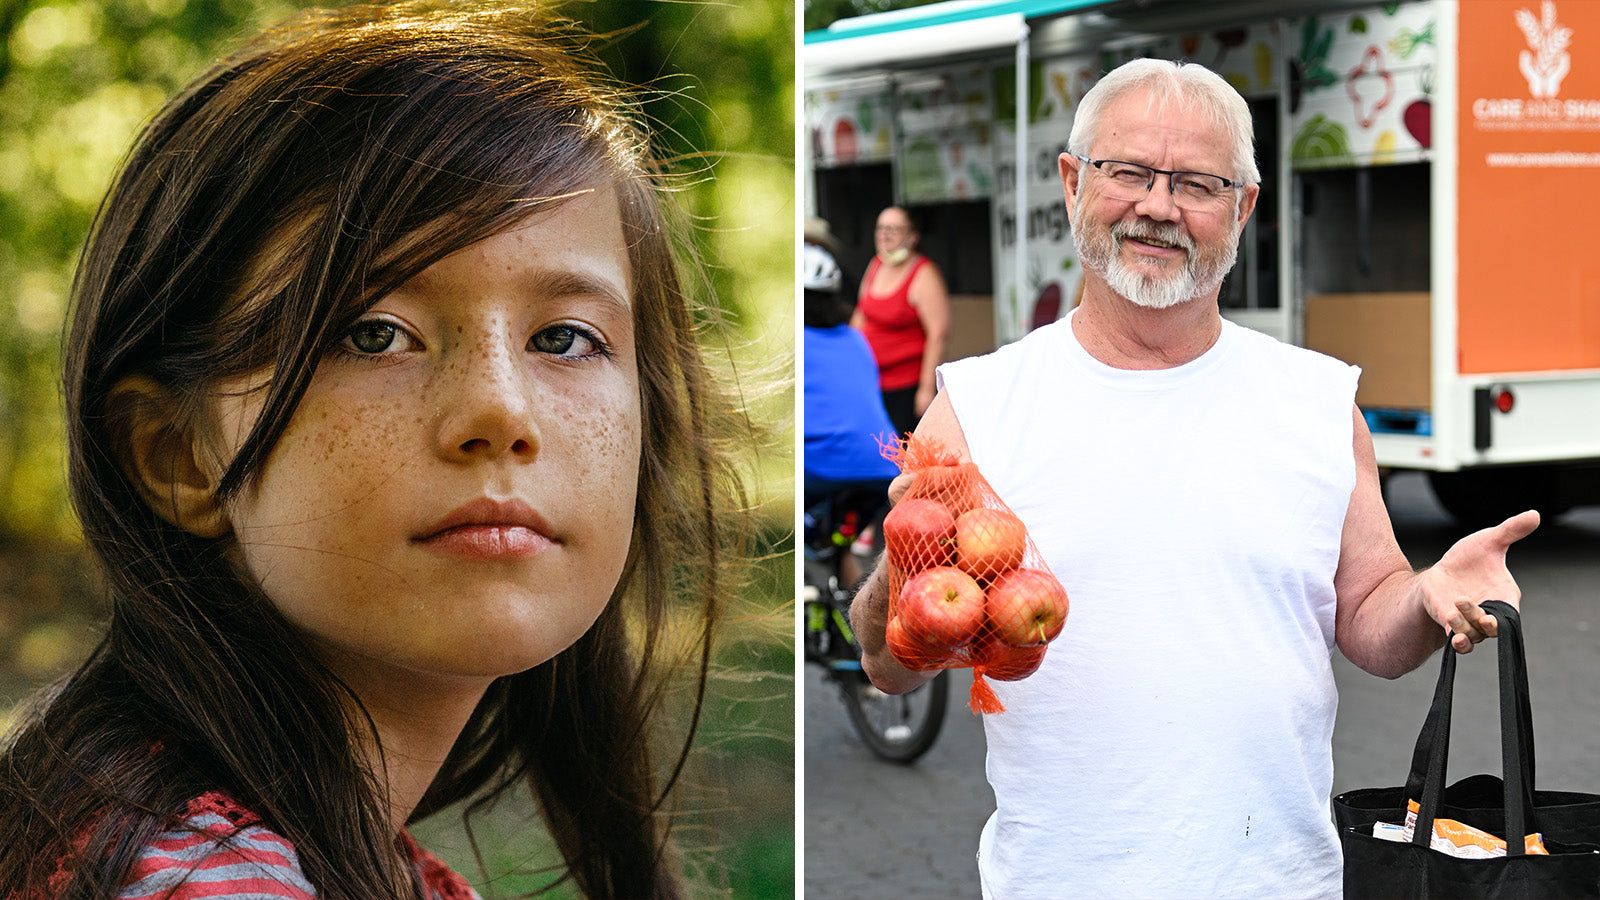 Left: A close up of a young girl. Right: An older man holding a bag of apples.